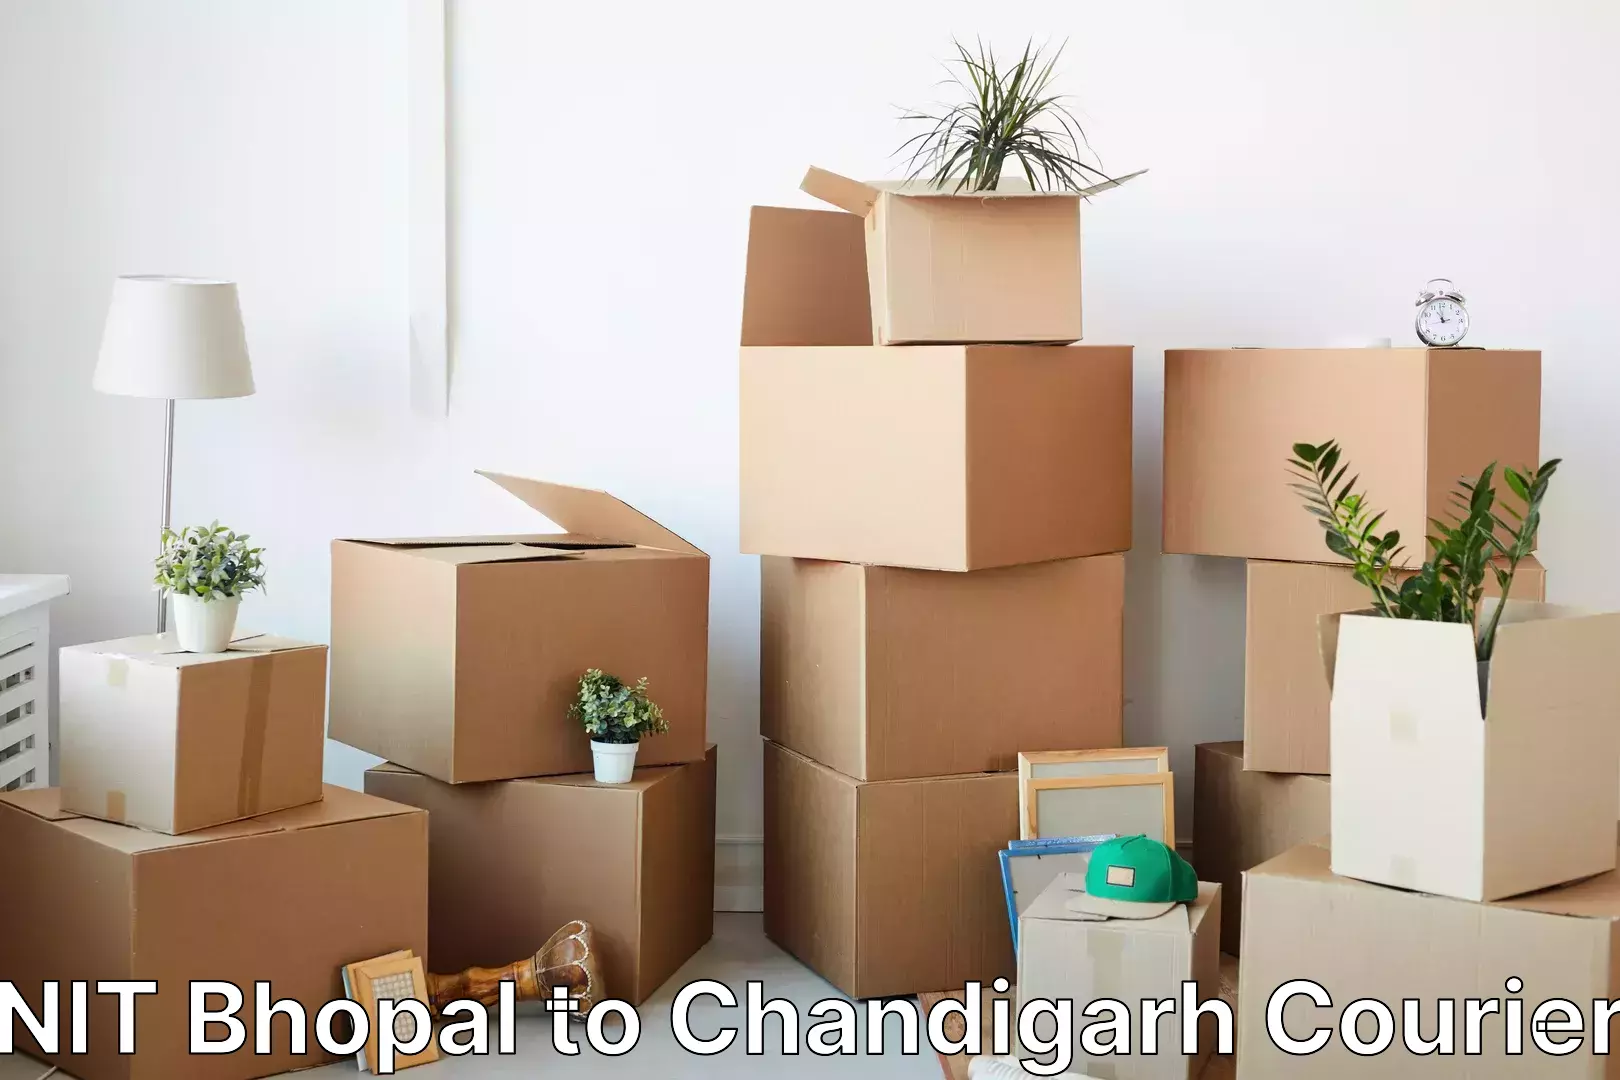 Ocean freight courier NIT Bhopal to Chandigarh